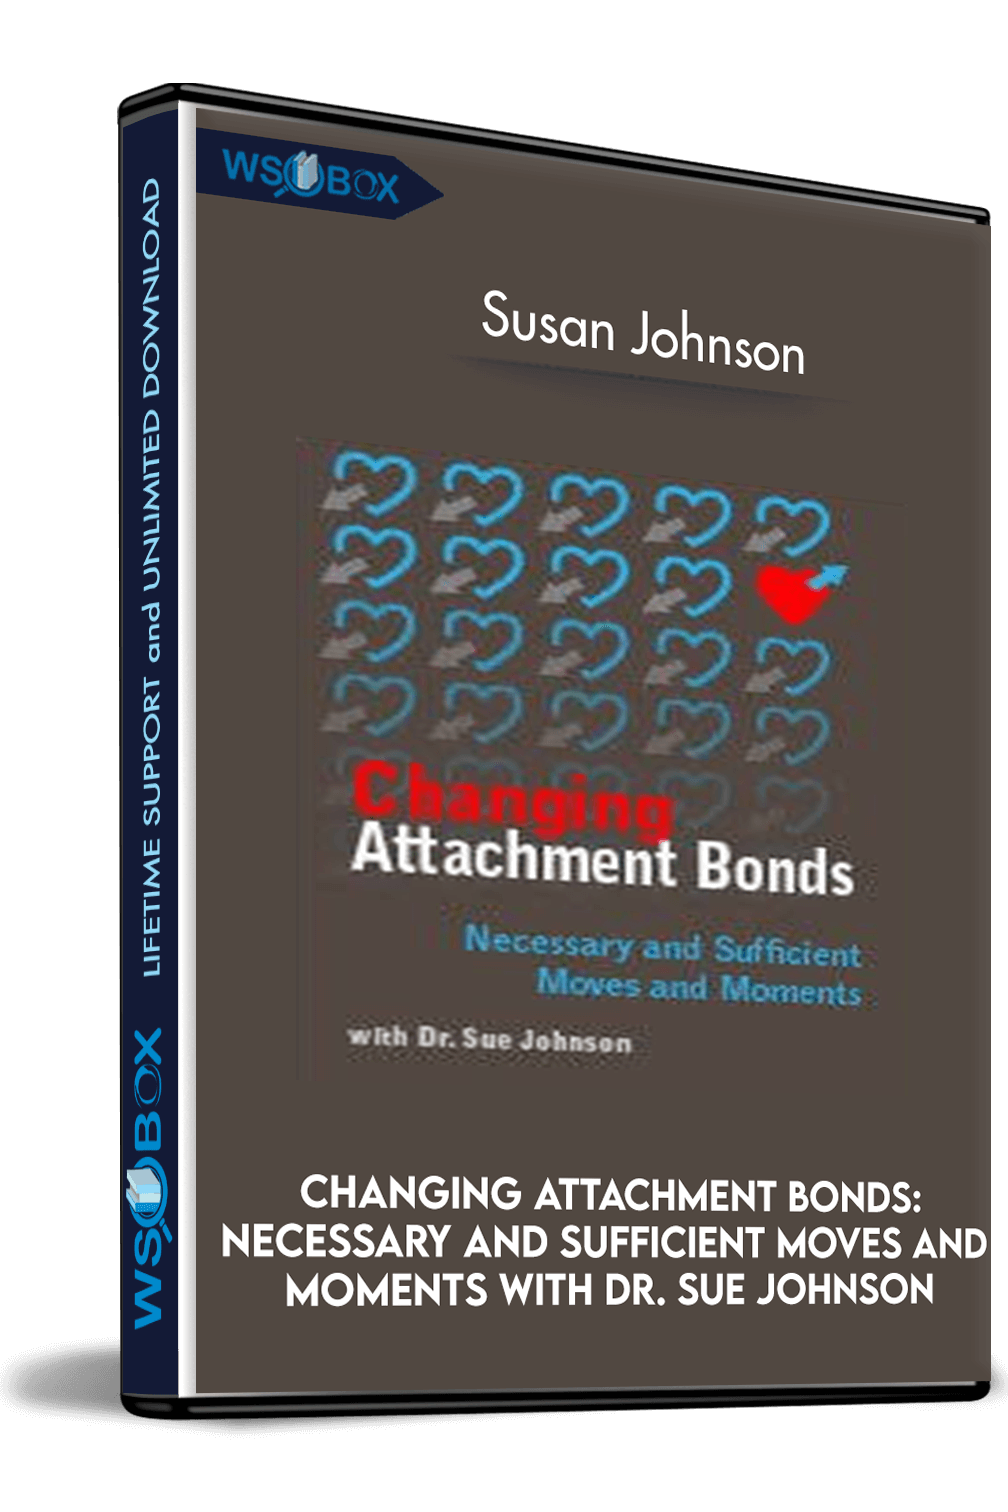 Changing Attachment Bonds: Necessary and Sufficient Moves and Moments with Dr. Sue Johnson – Susan Johnson